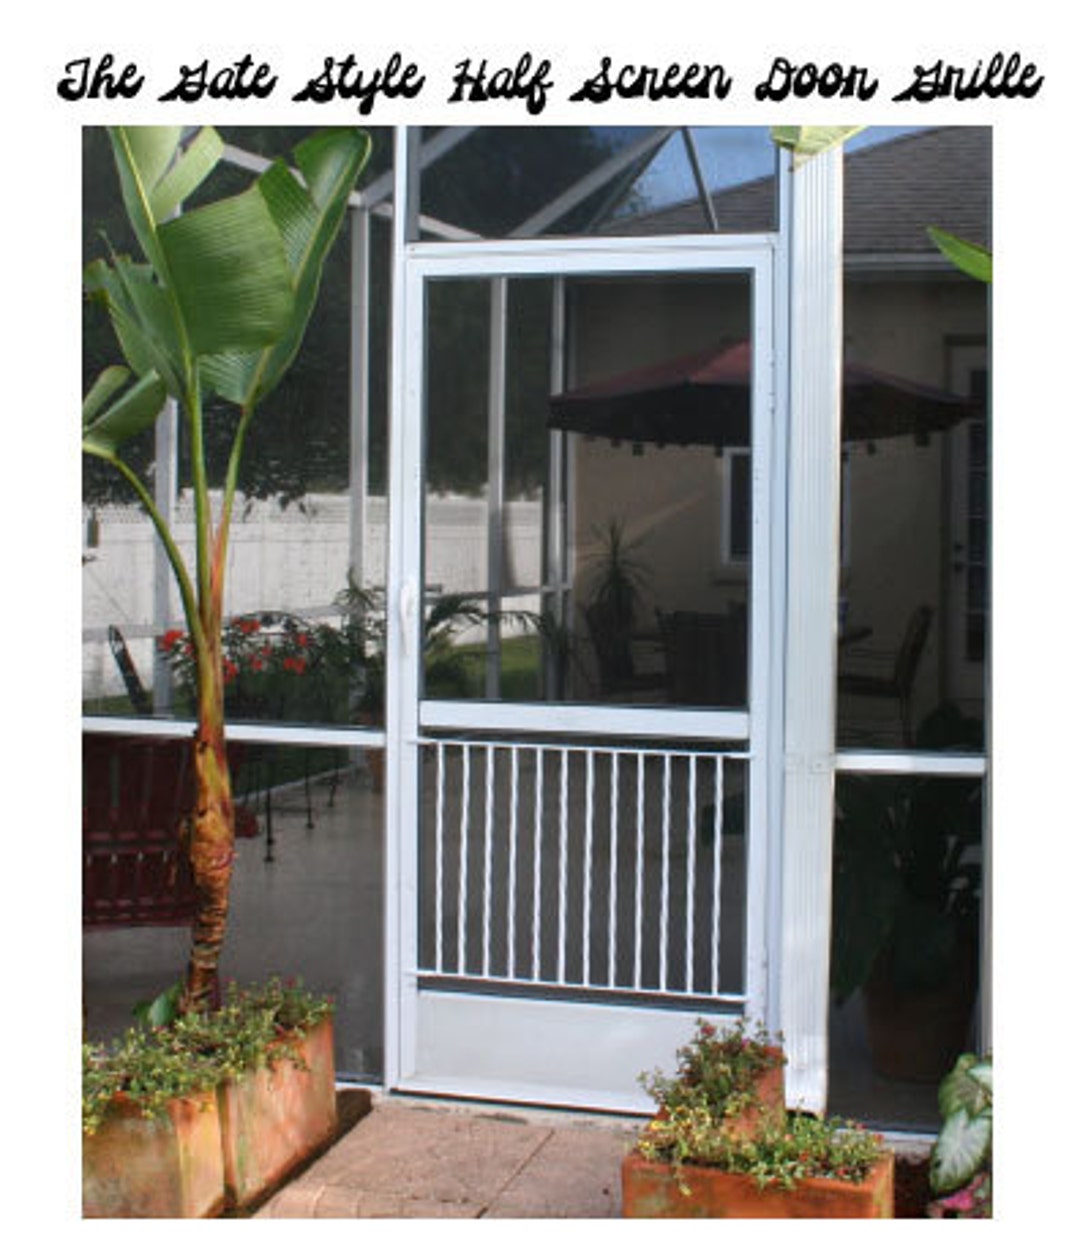 Trellis, Stainless Steel Wire, Modern, Metal Frame, Wall Mount or